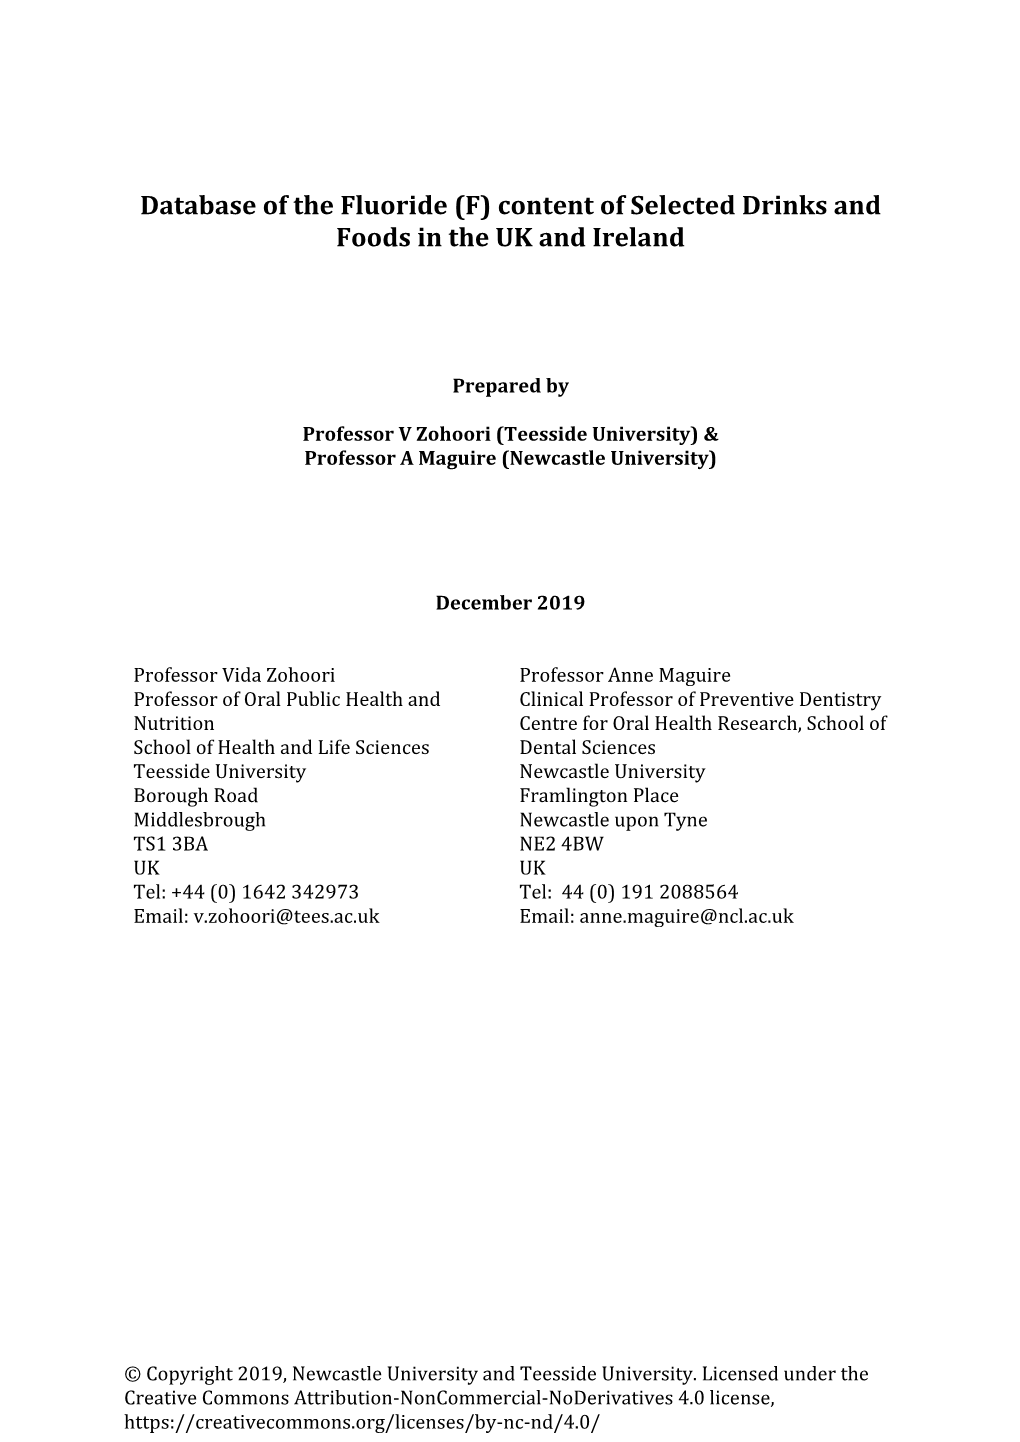 Database of the Fluoride (F) Content of Selected Drinks and Foods in the UK and Ireland